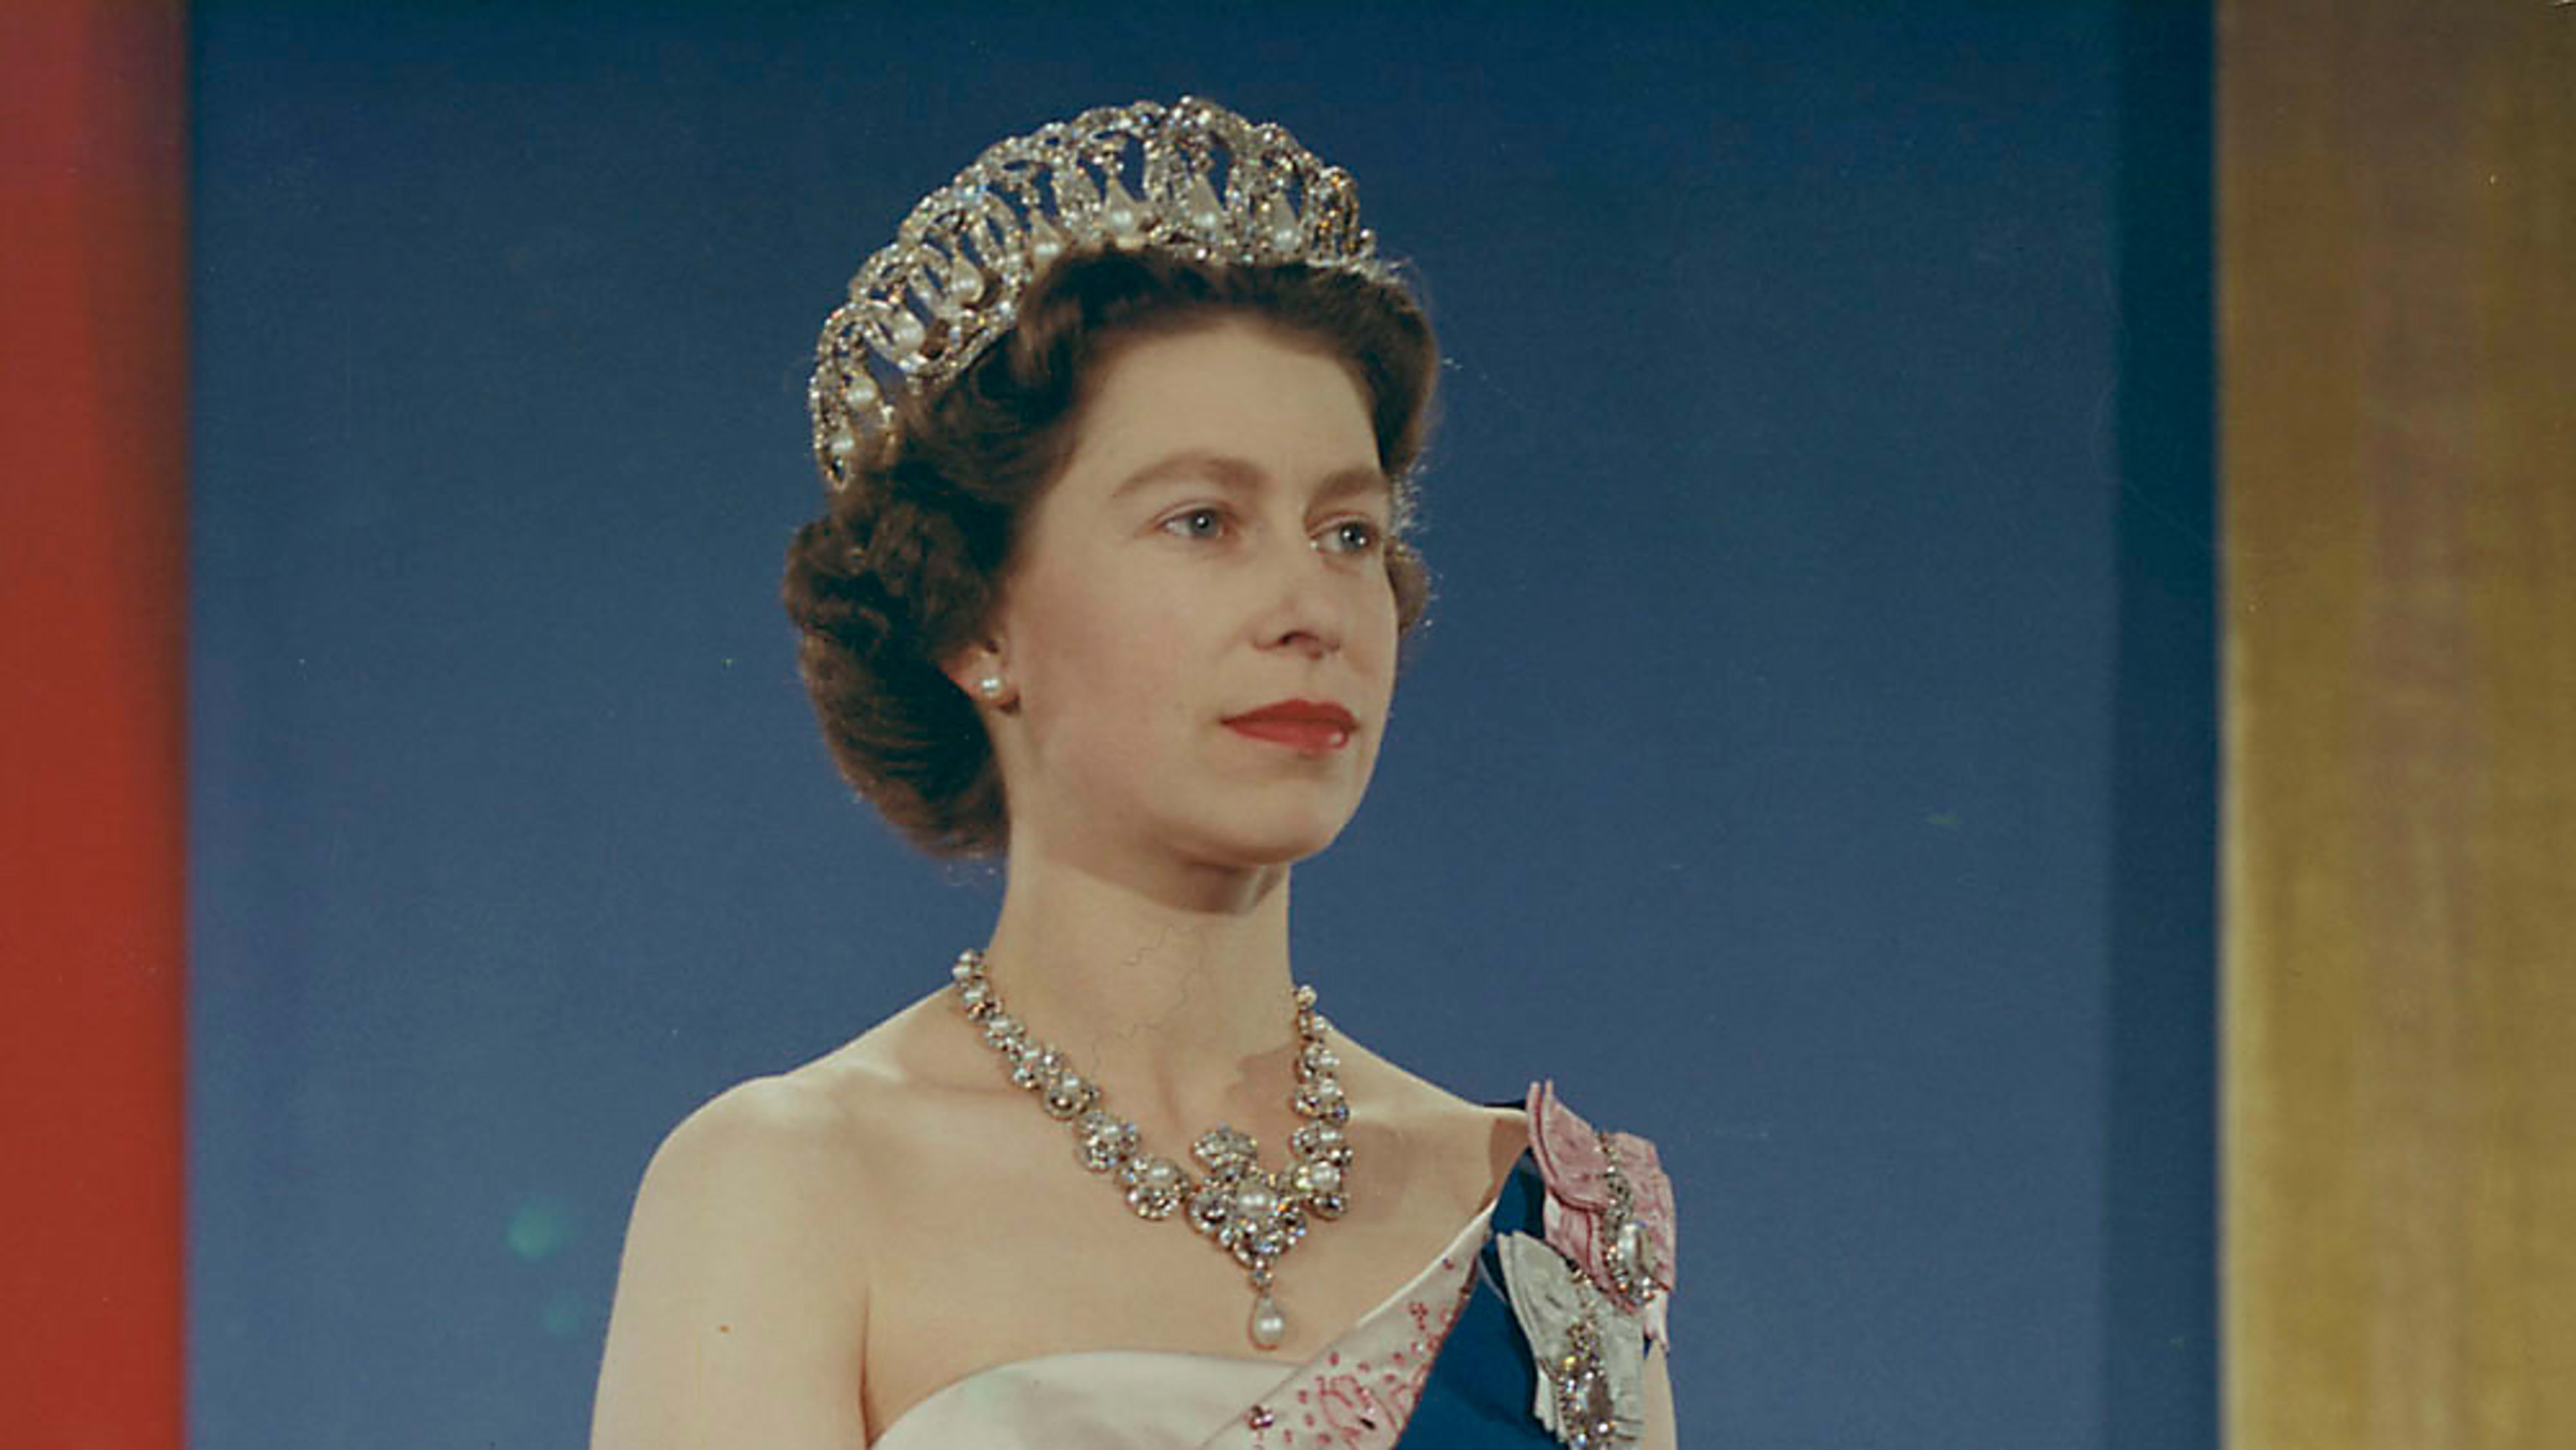 How to watch Queen Elizabeth II’s funeral live on PBS, BBC, CNN, or elsewhere free without cable